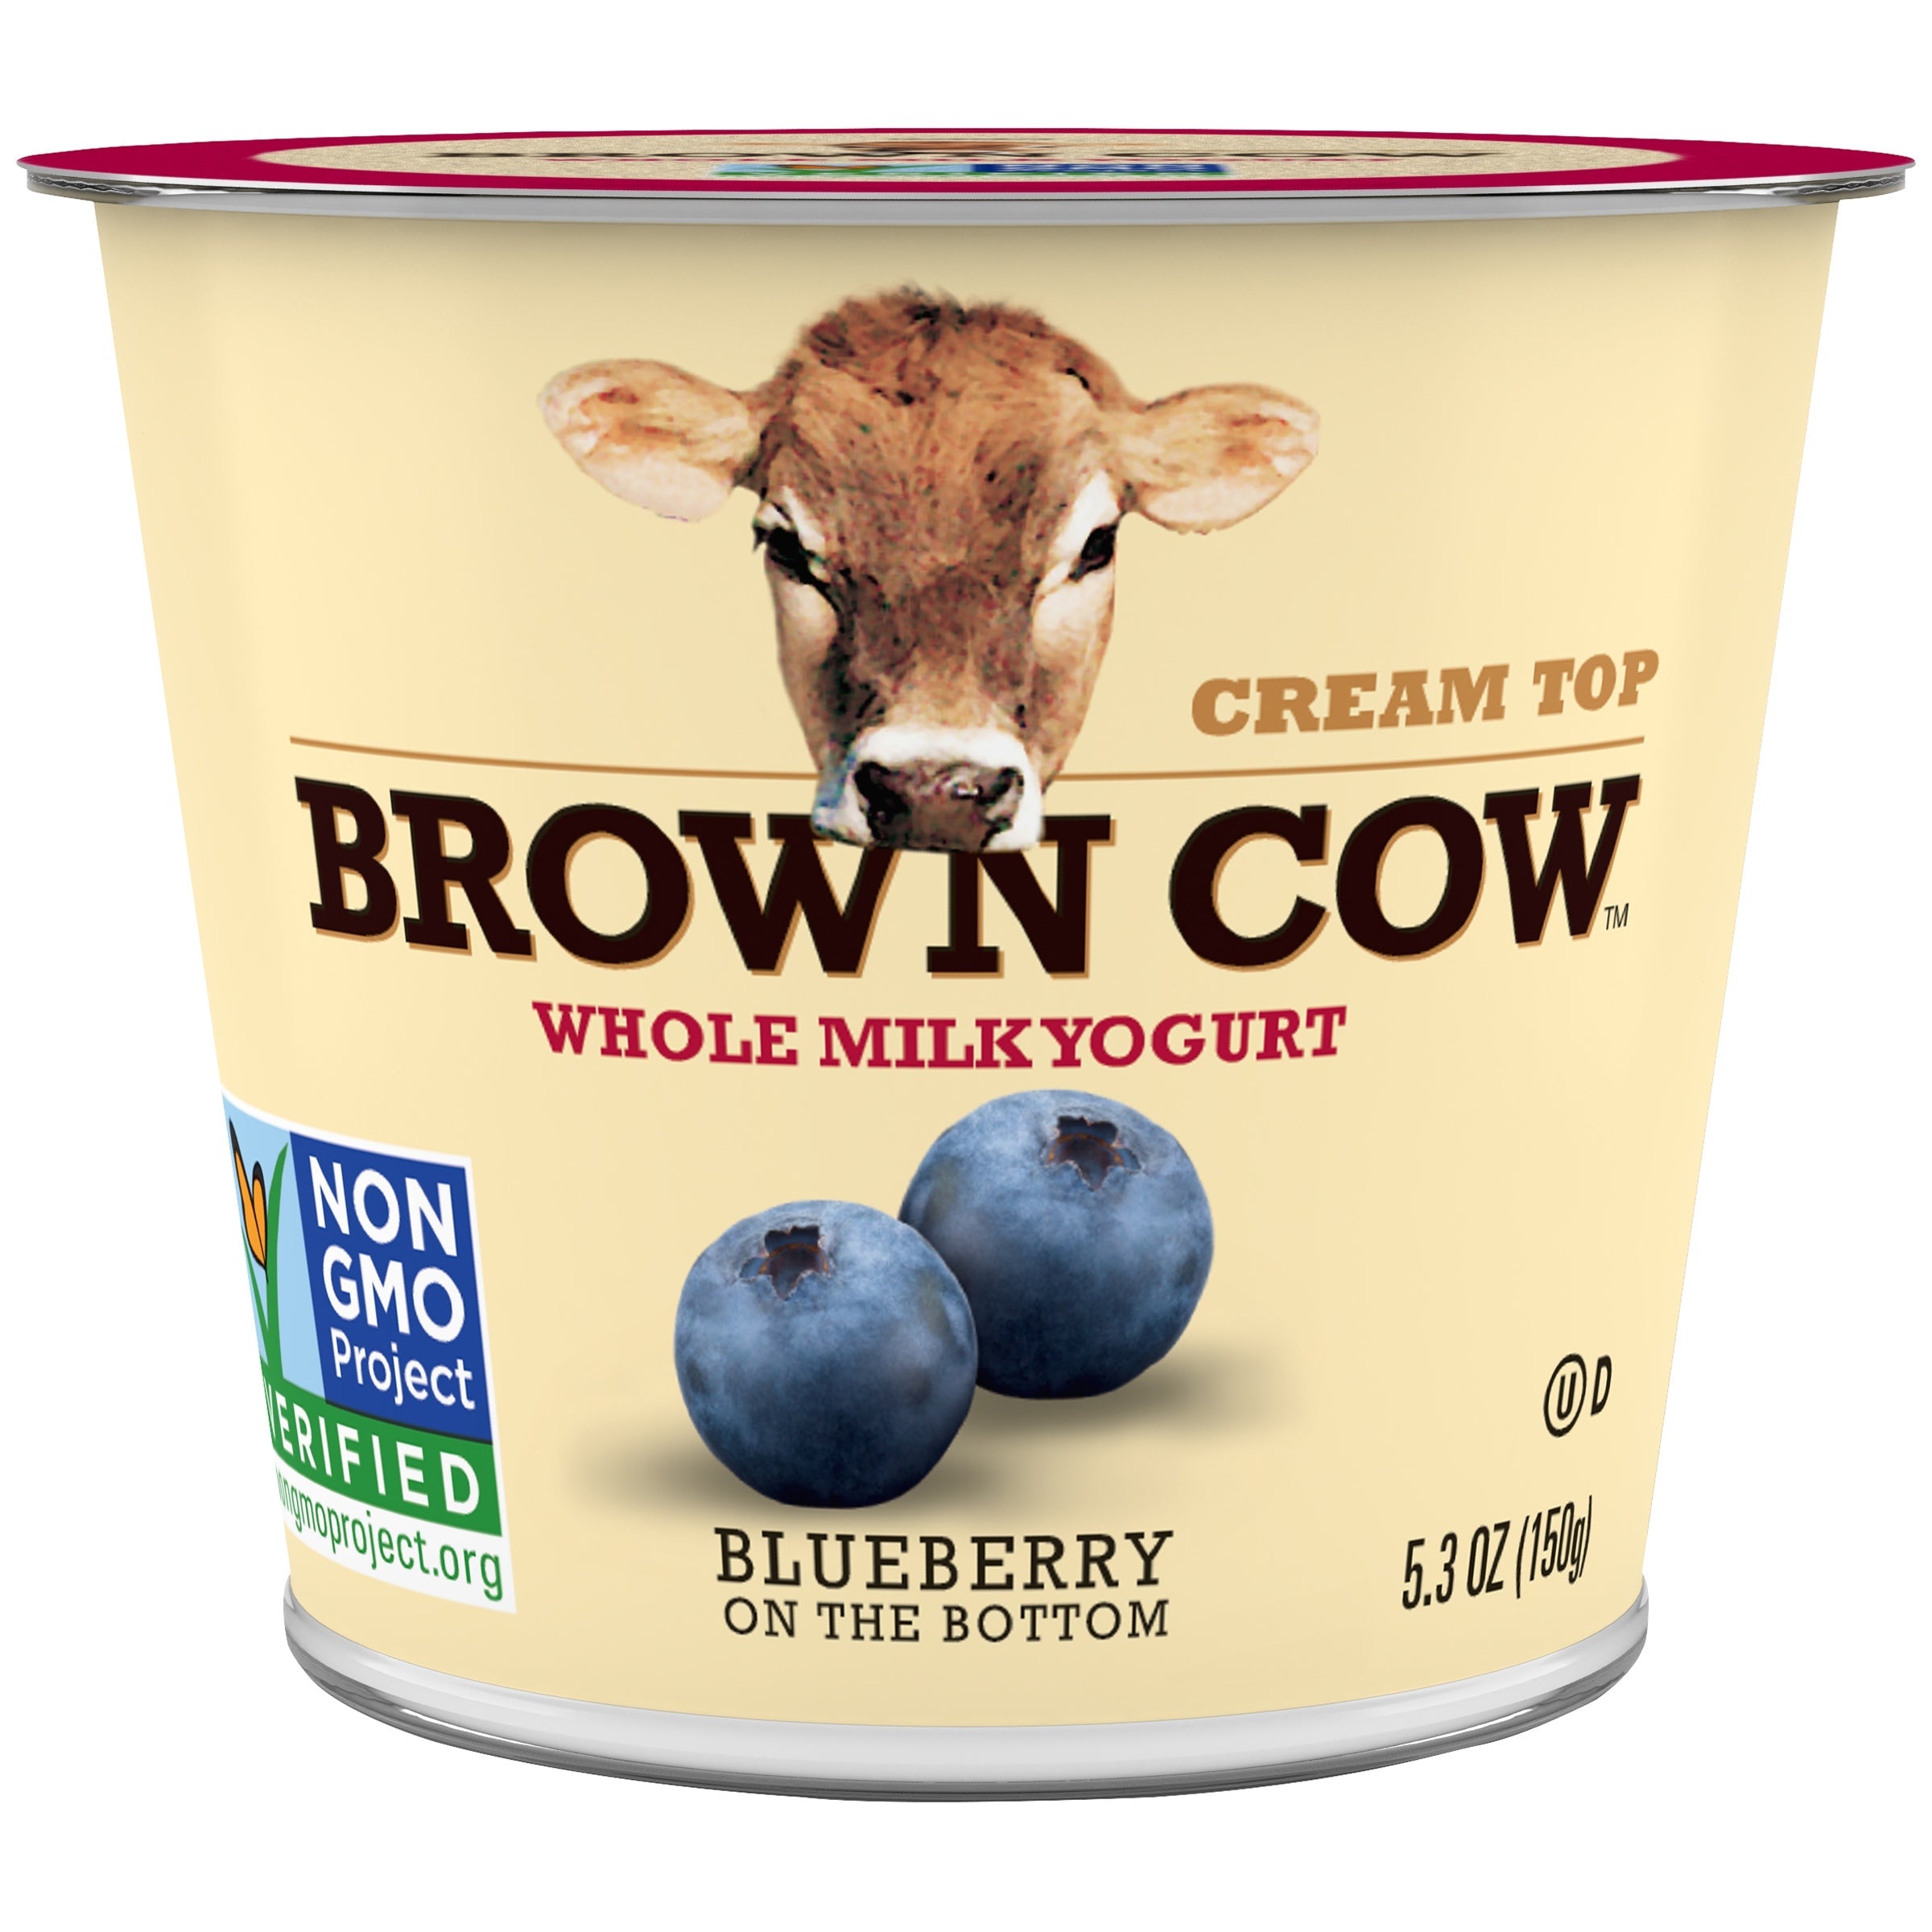 Brown Cow Cream Top Whole Milk Yogurt with Blueberry On The Bottom 5.3 Oz Cup